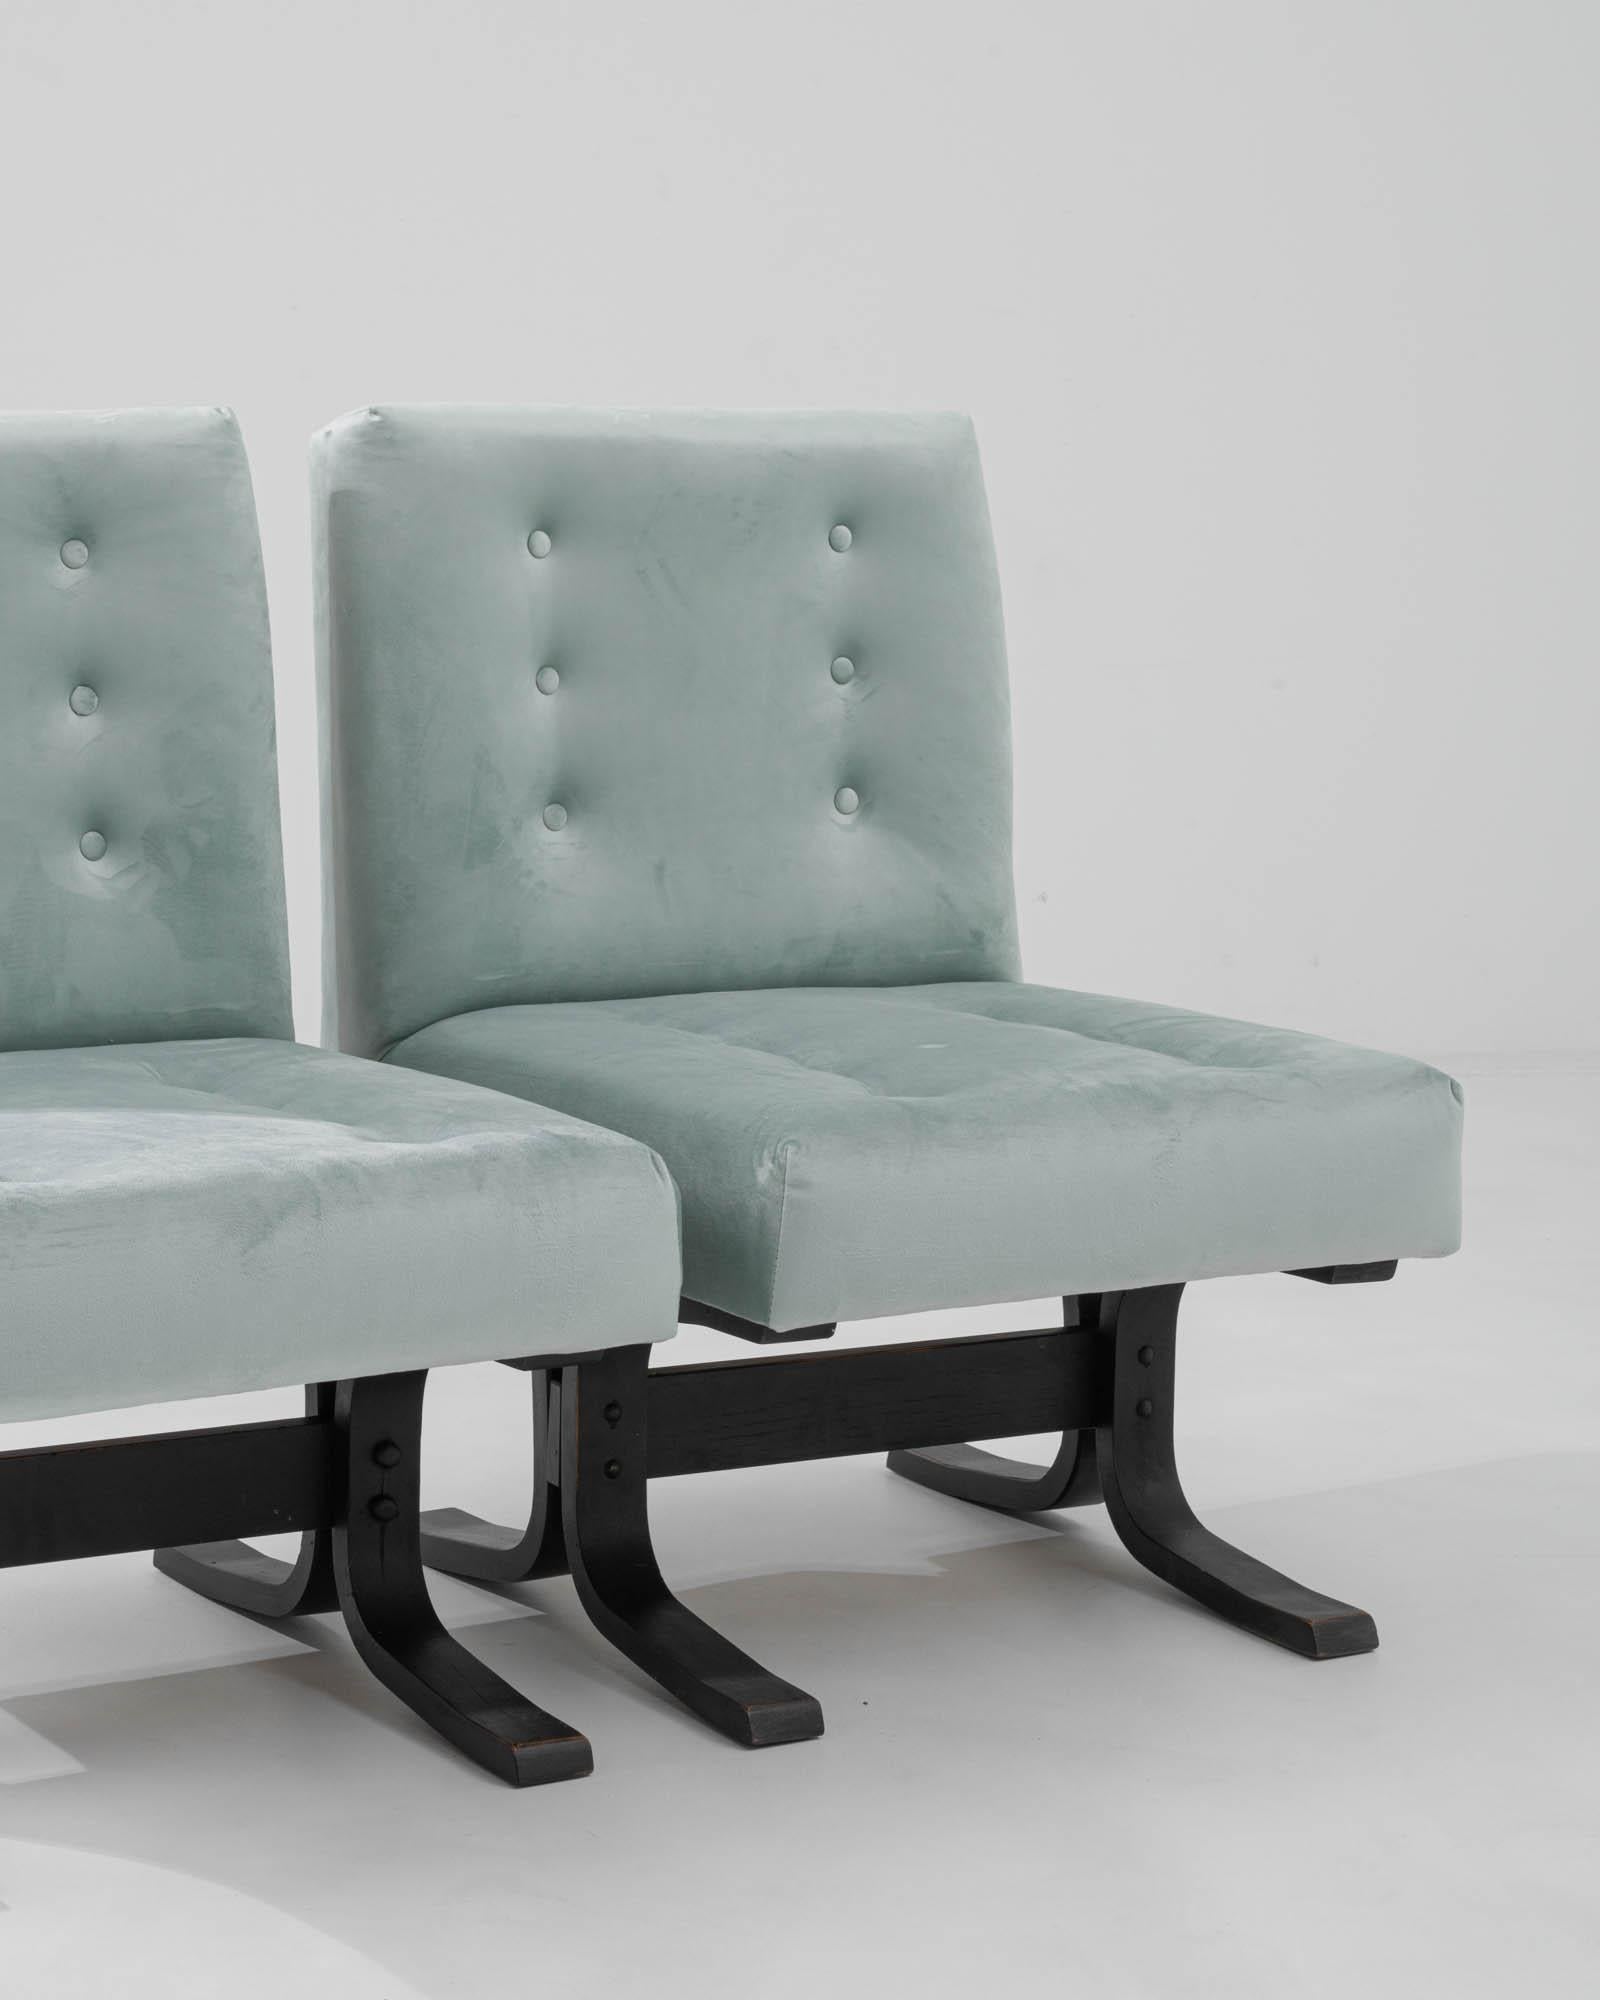 1960s Czechia Upholstered Chairs by Ludvik Volak, Set of 2 For Sale 1